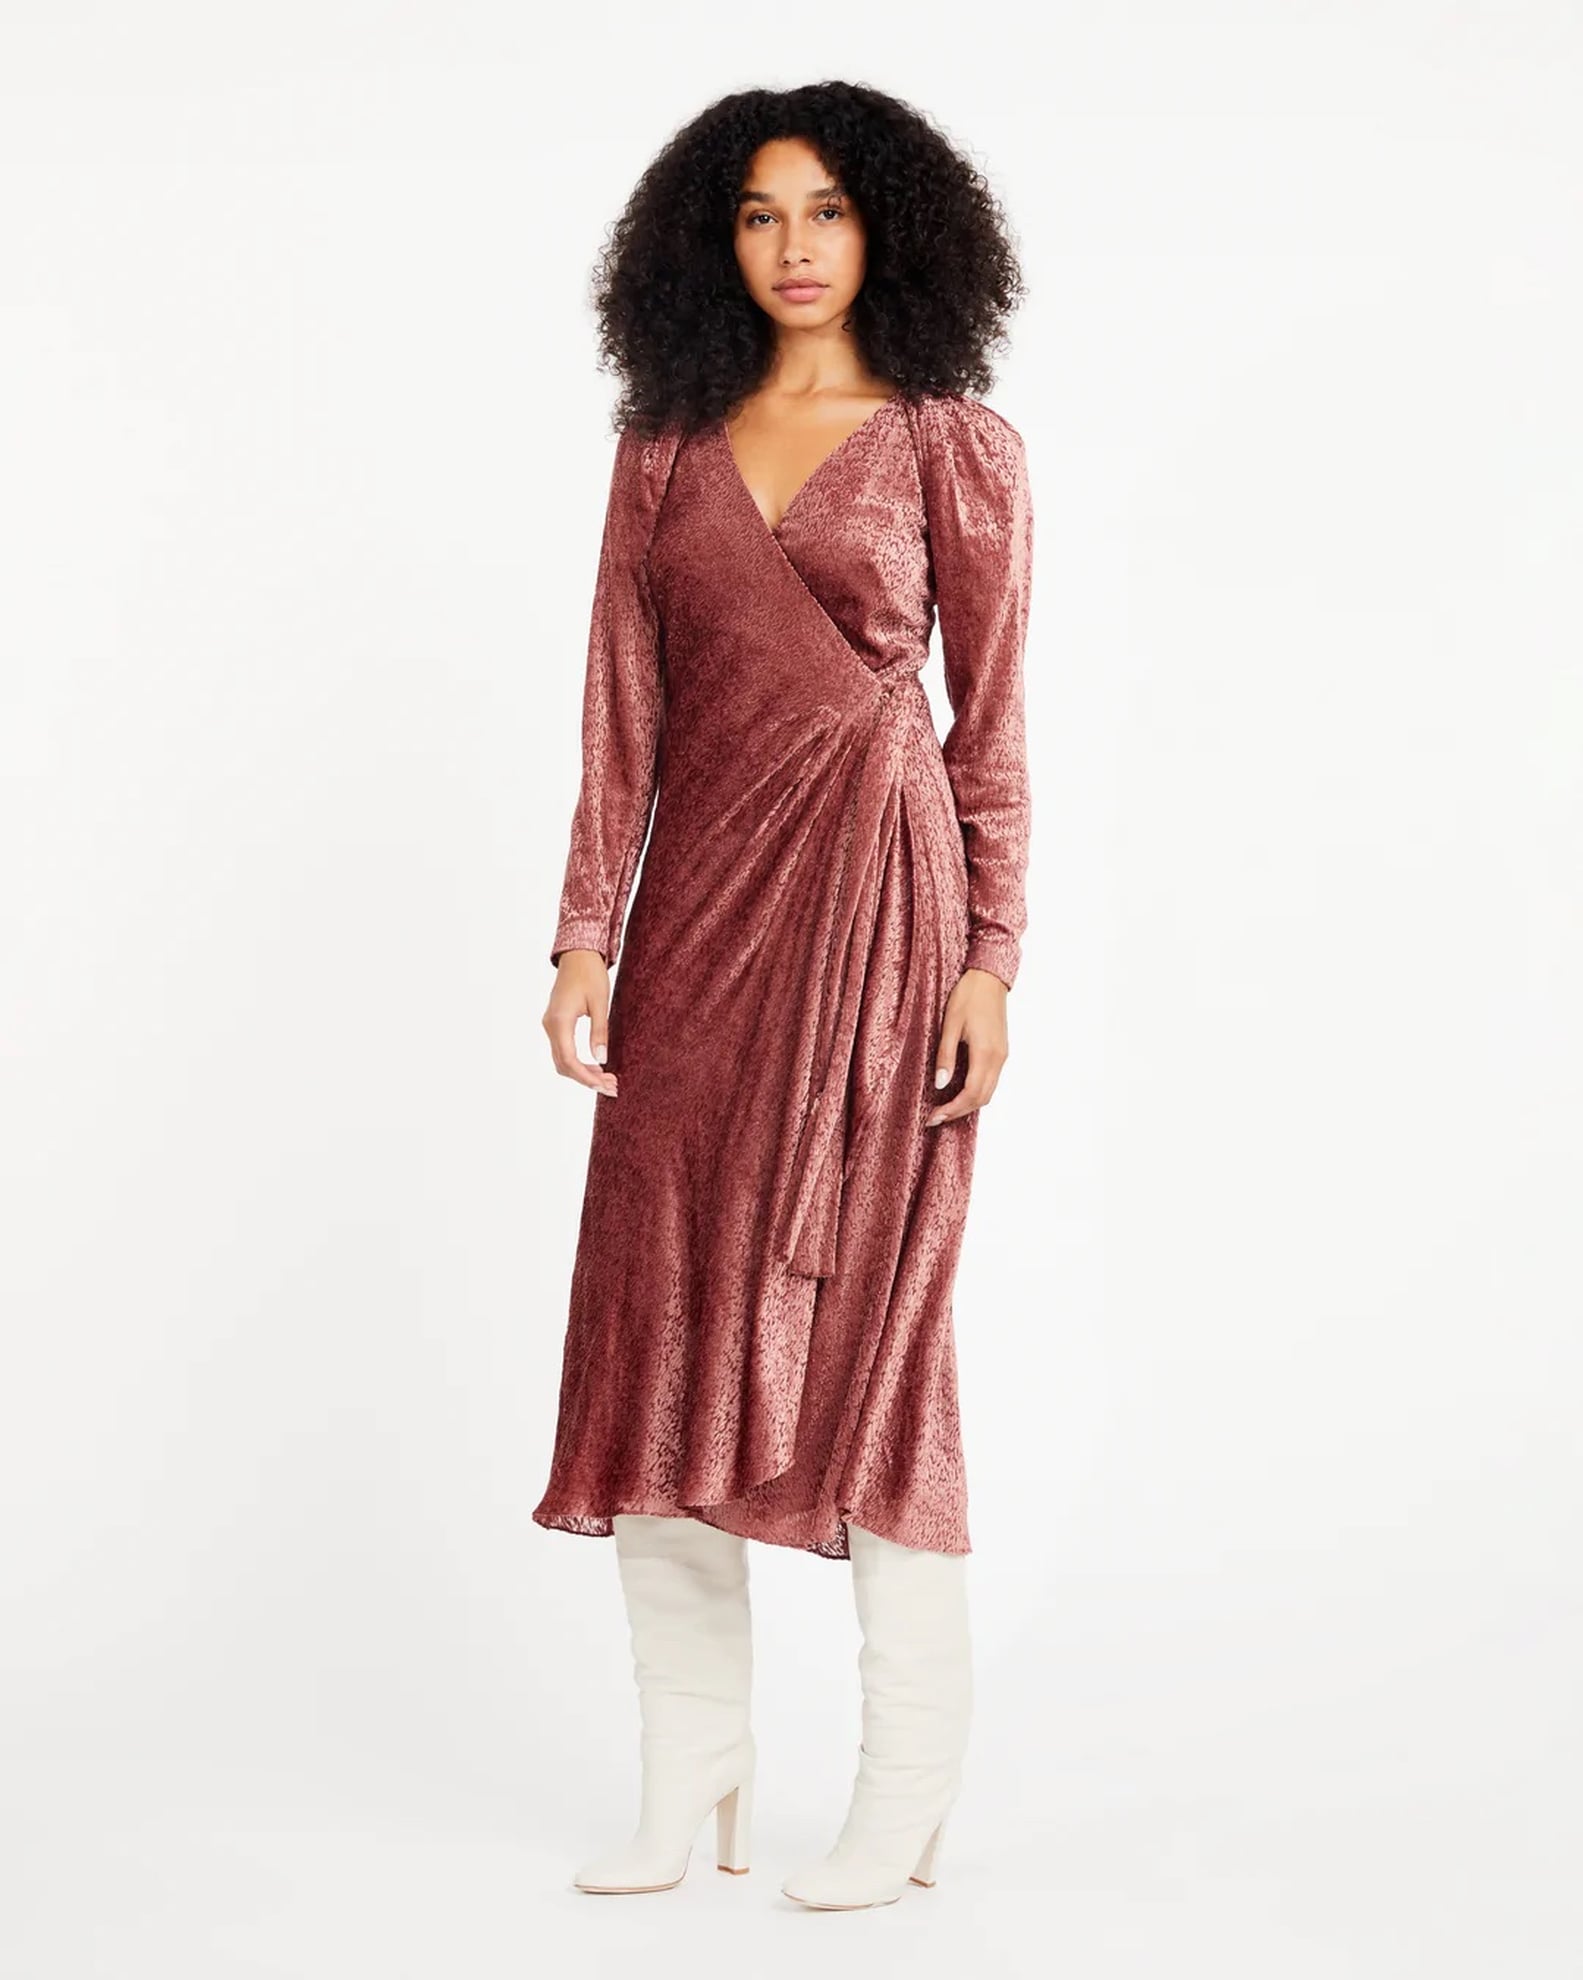 Fall & Winter Wedding Guest Dresses from Old Navy and More | POPSUGAR ...